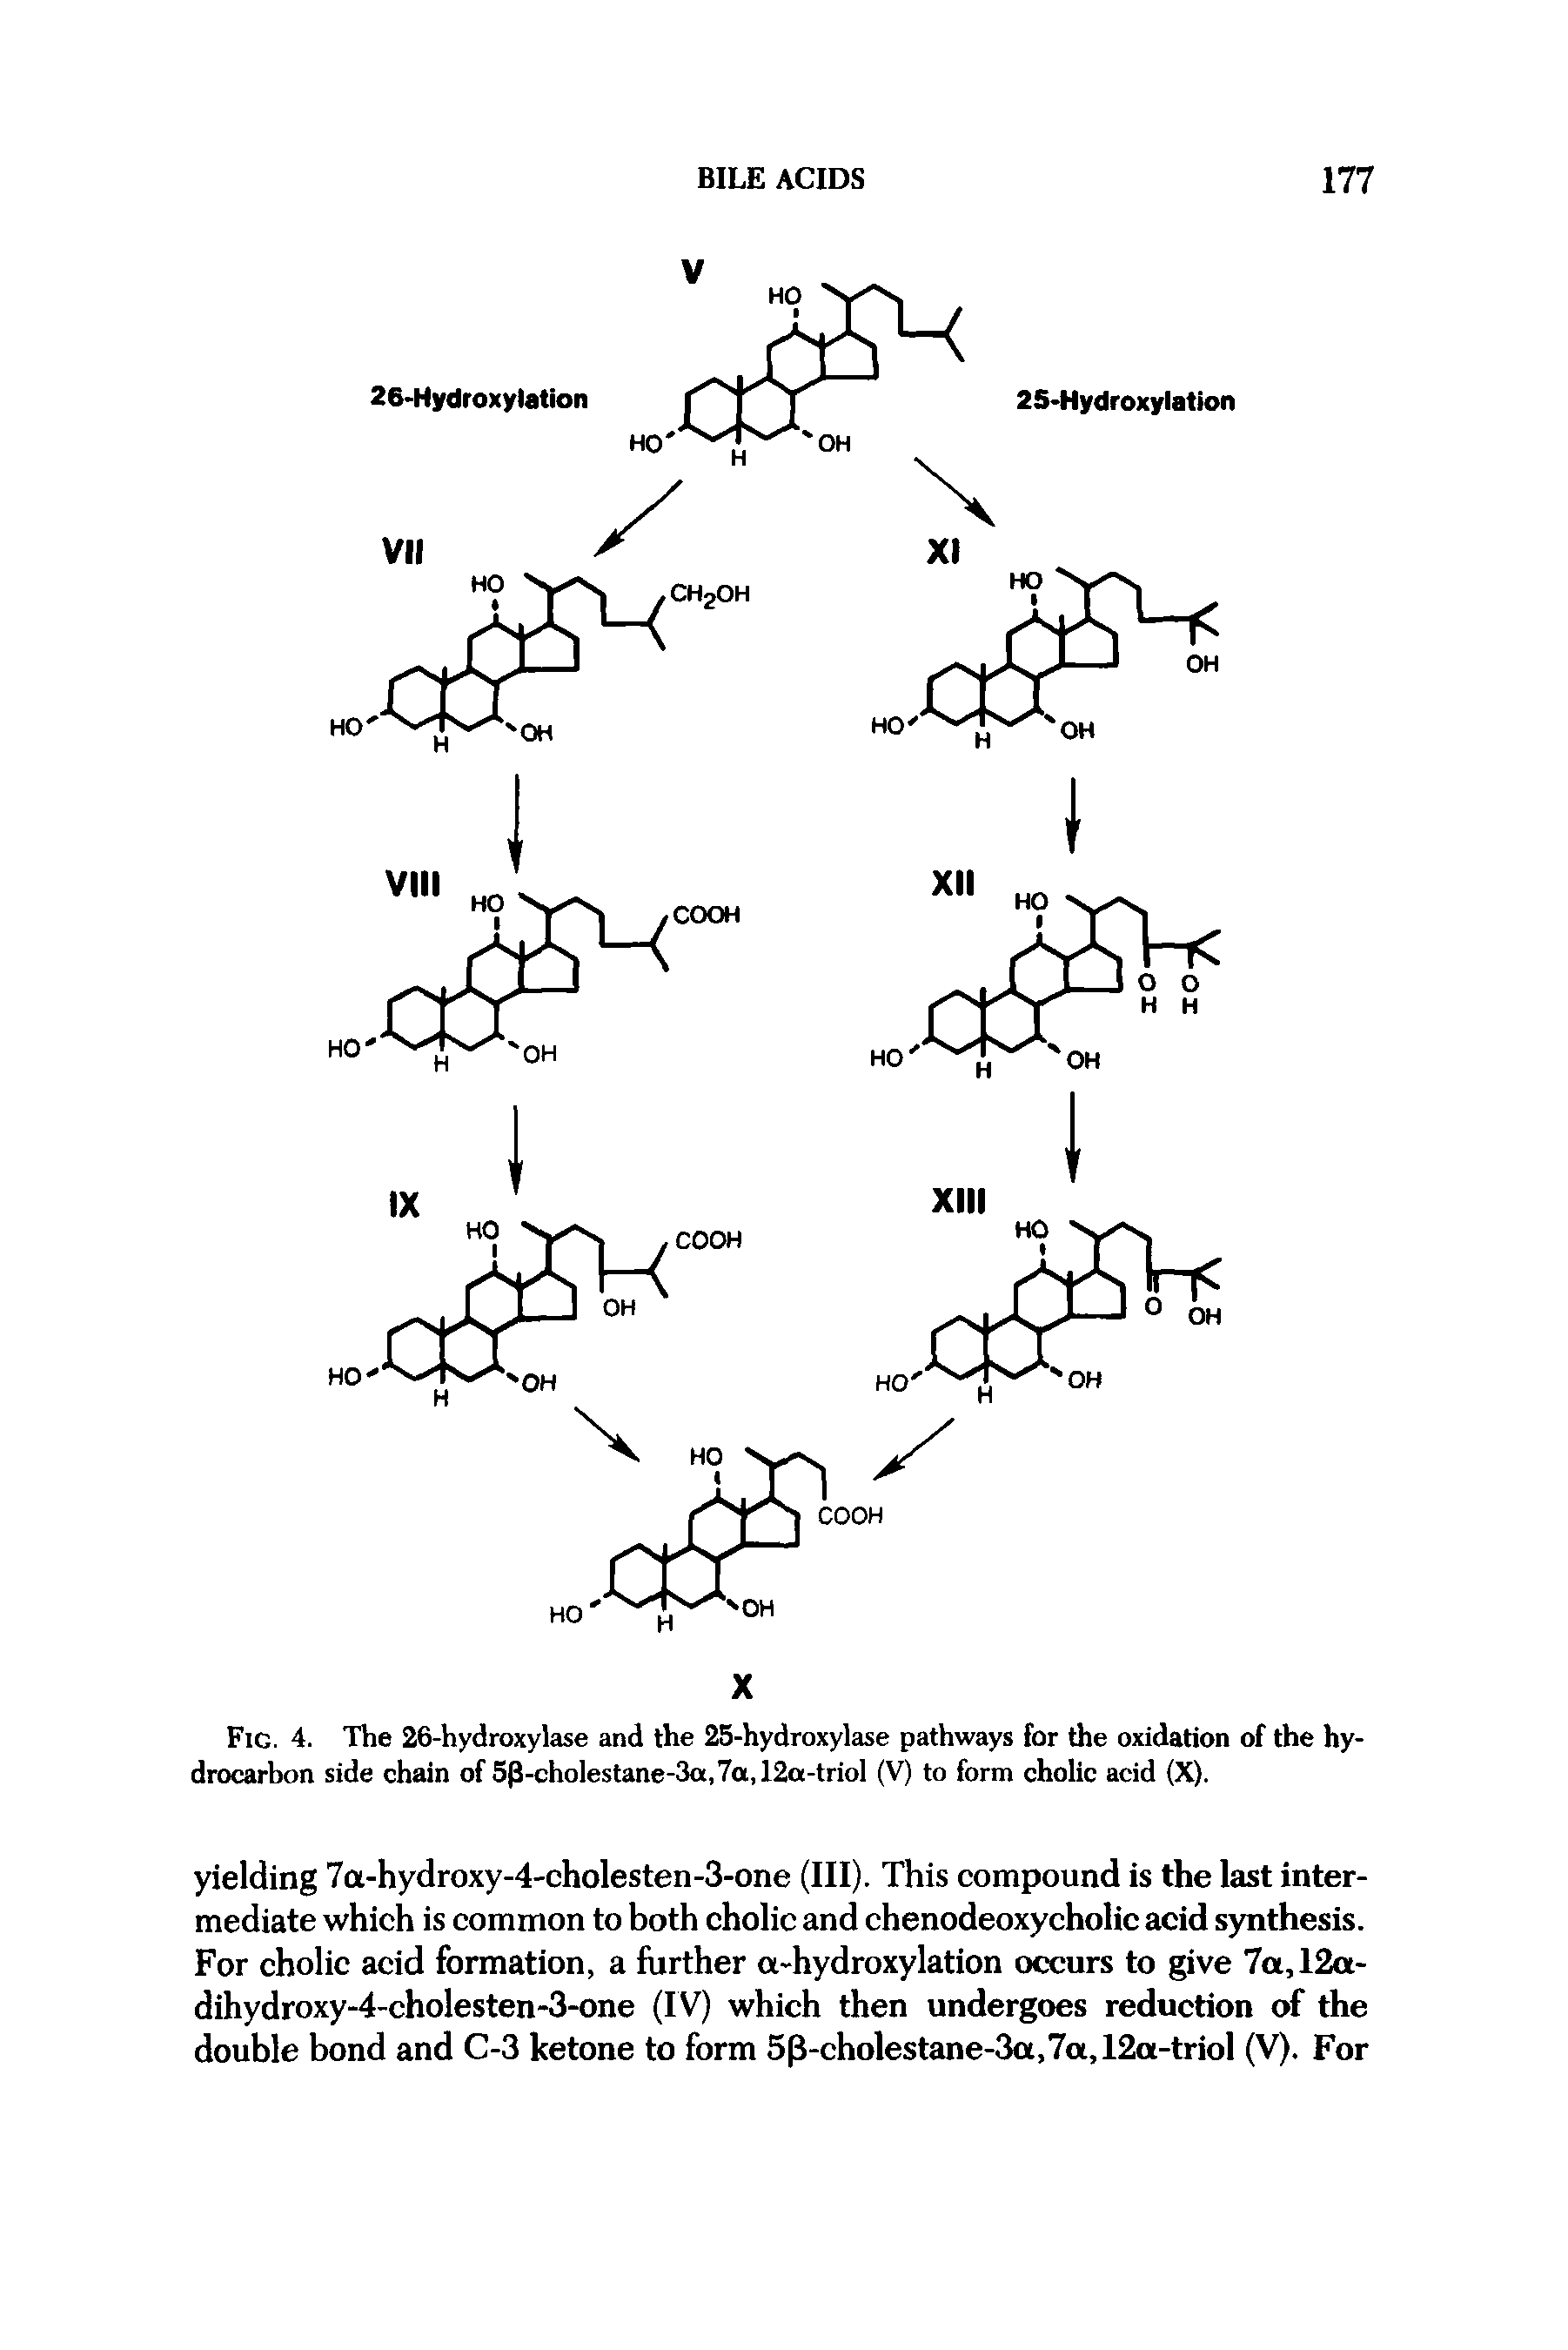 Fig. 4. The 26-hydroxylase and the 25-hydroxylase pathways for the oxidation of the hydrocarbon side chain of 5p-cholestane-3a,7a,12a-triol (V) to form cholic acid (X).